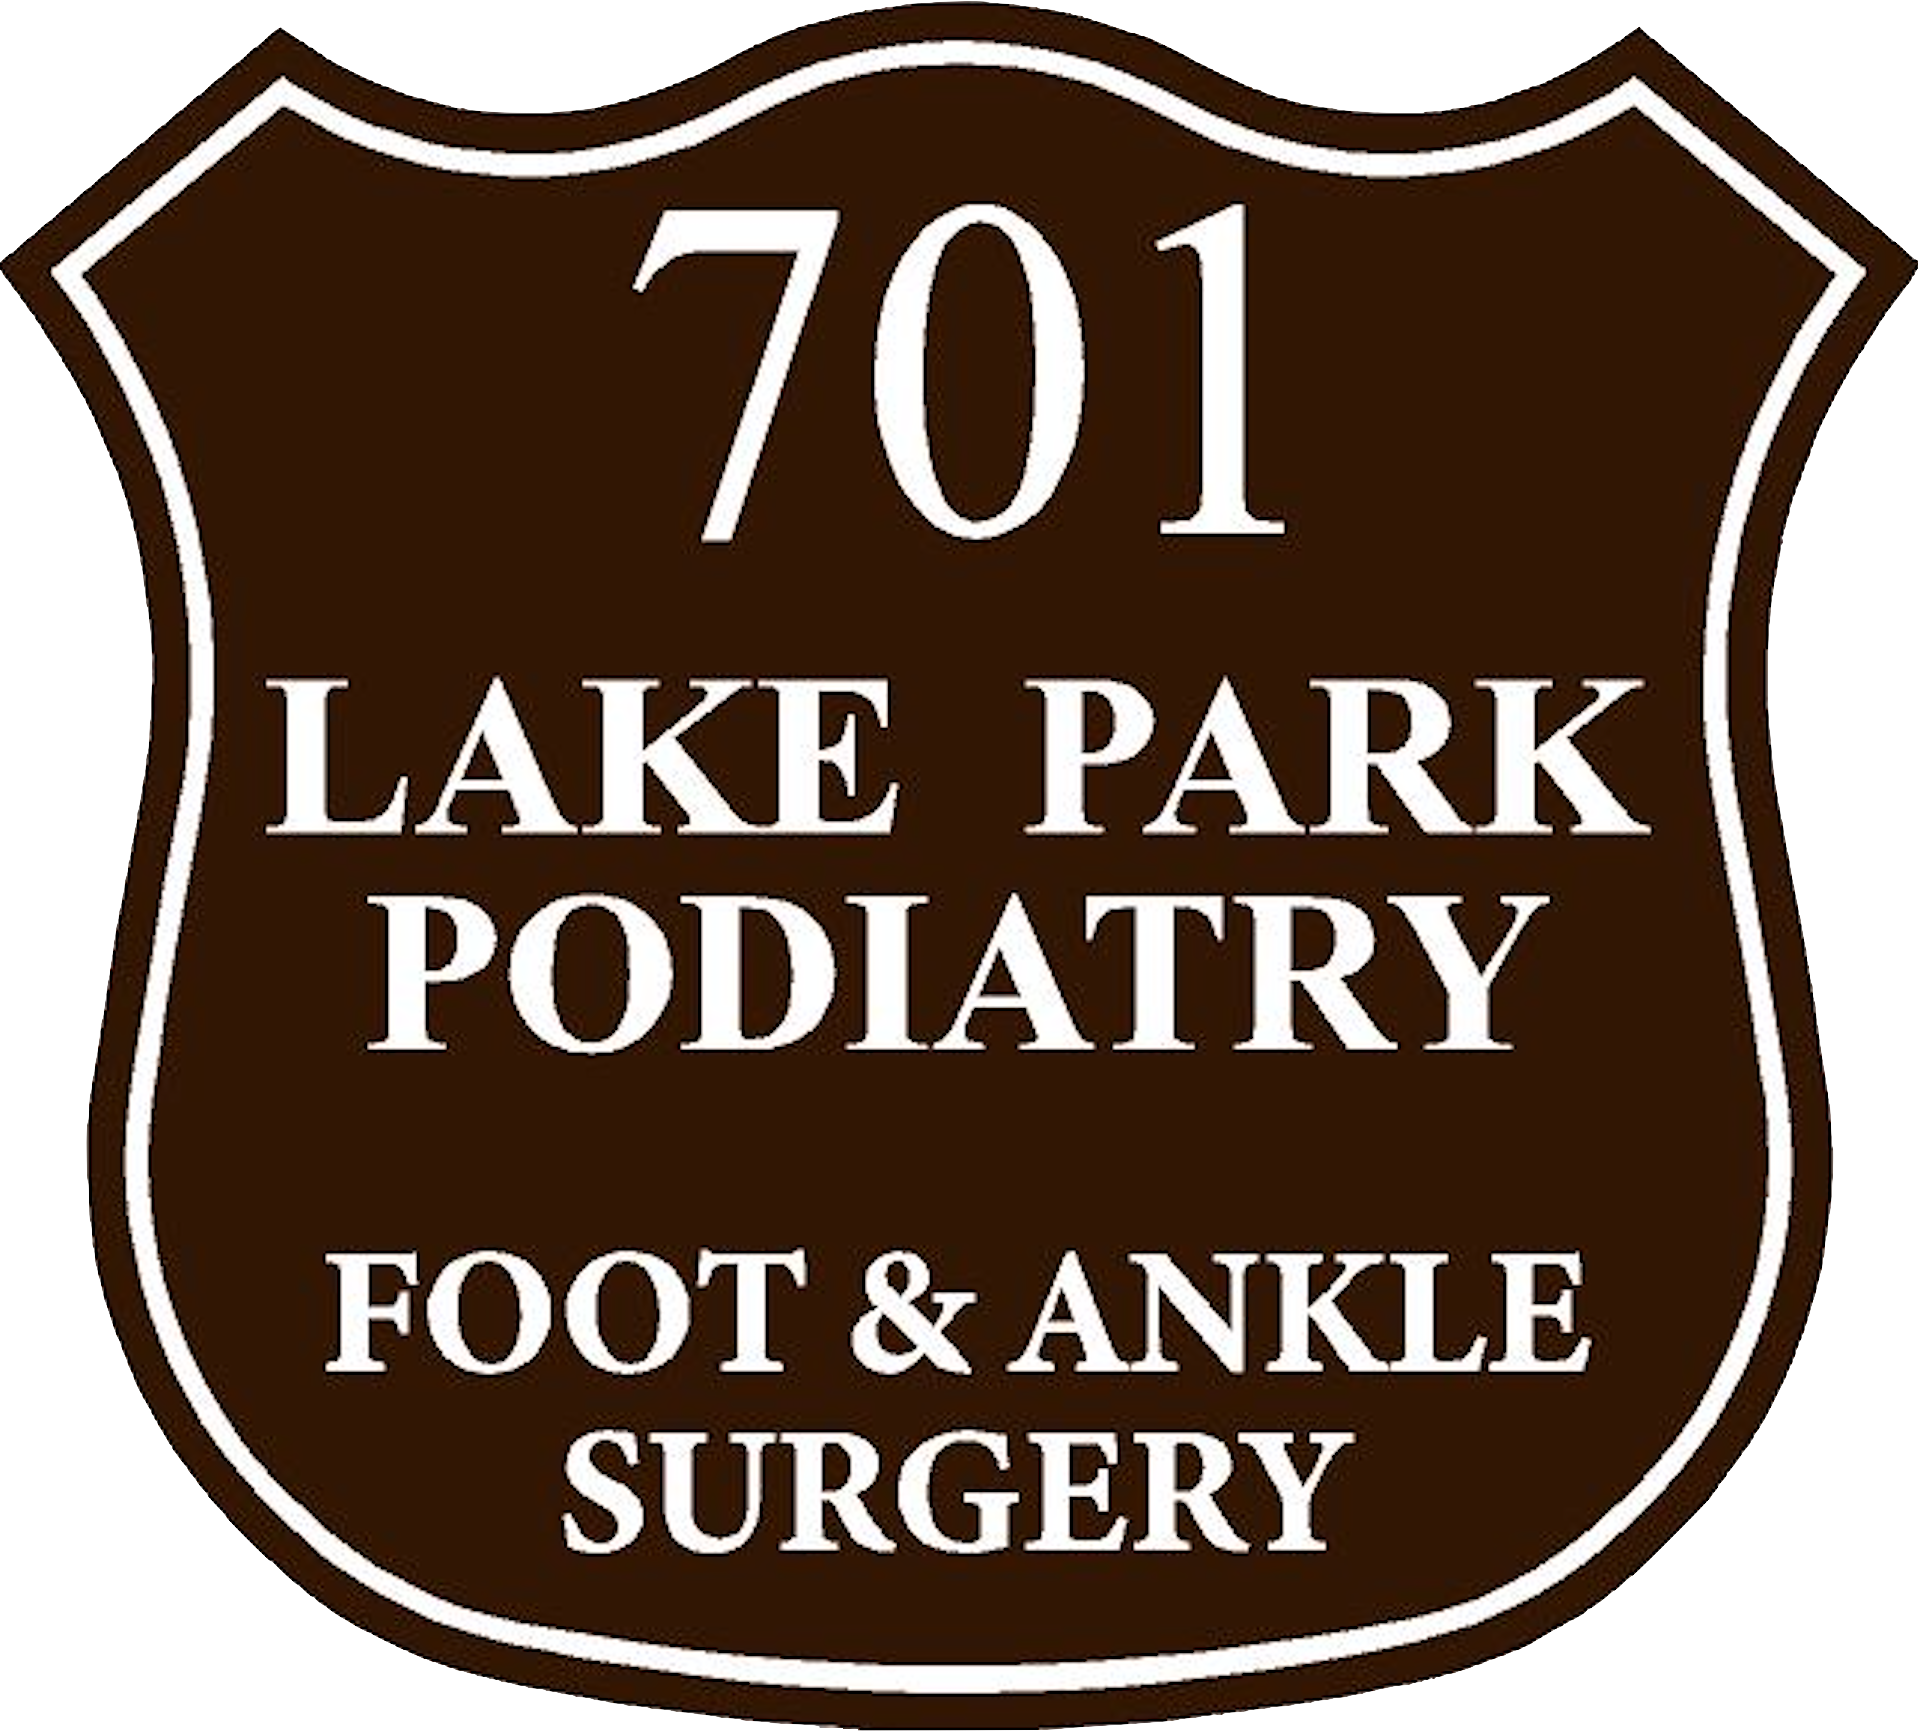 Picture of the 701 Lake Park Podiatry Shield from the side of the building